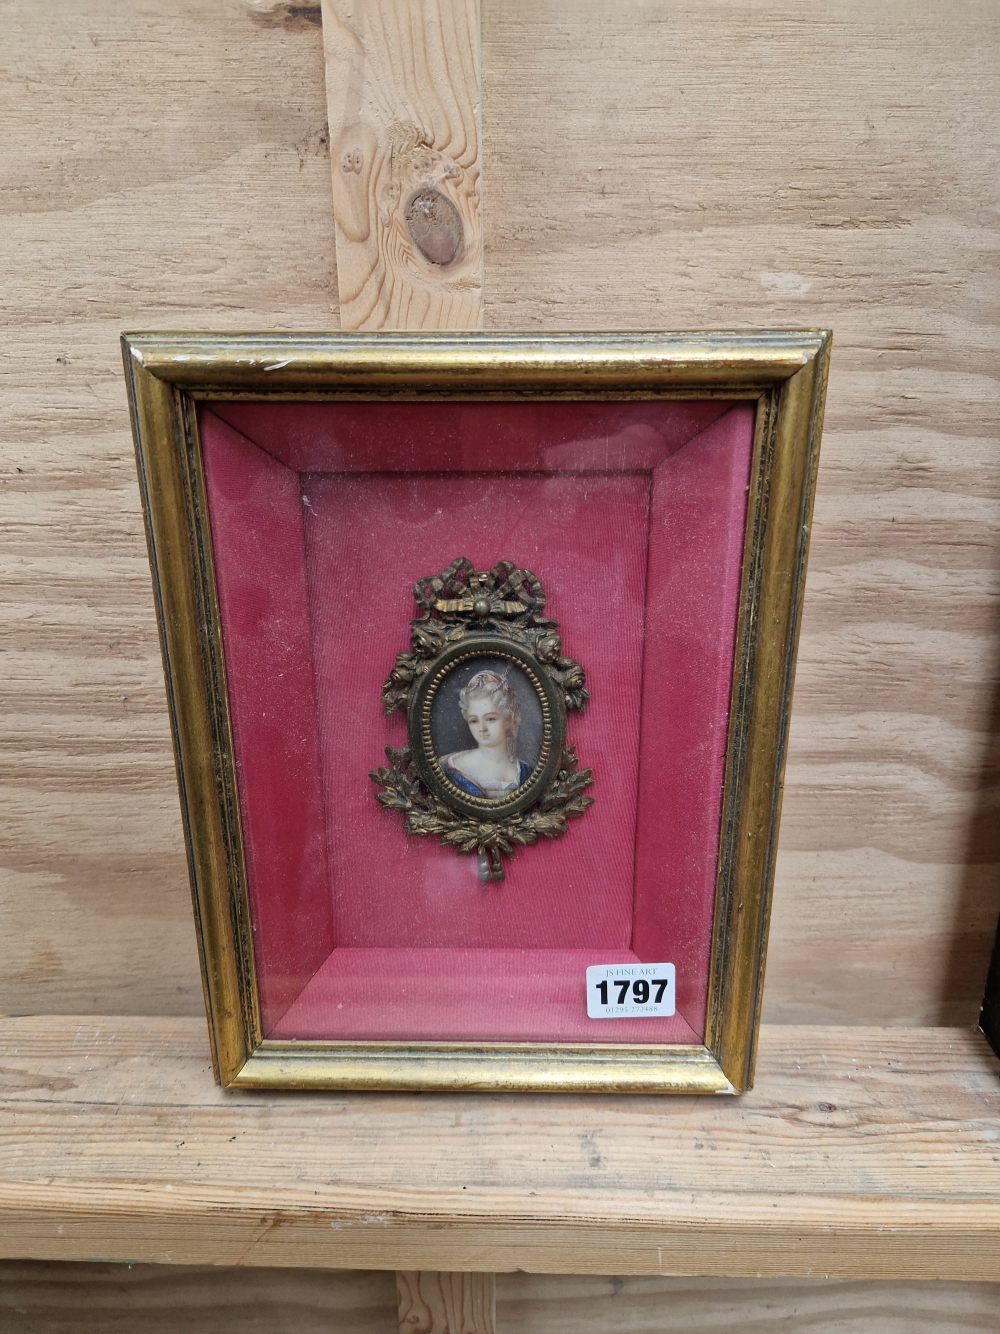 A DECORATIVE MINIATURE PORTRAIT PAINTING OF A LADY IN 18th CENTURY DRESS. - Image 4 of 5